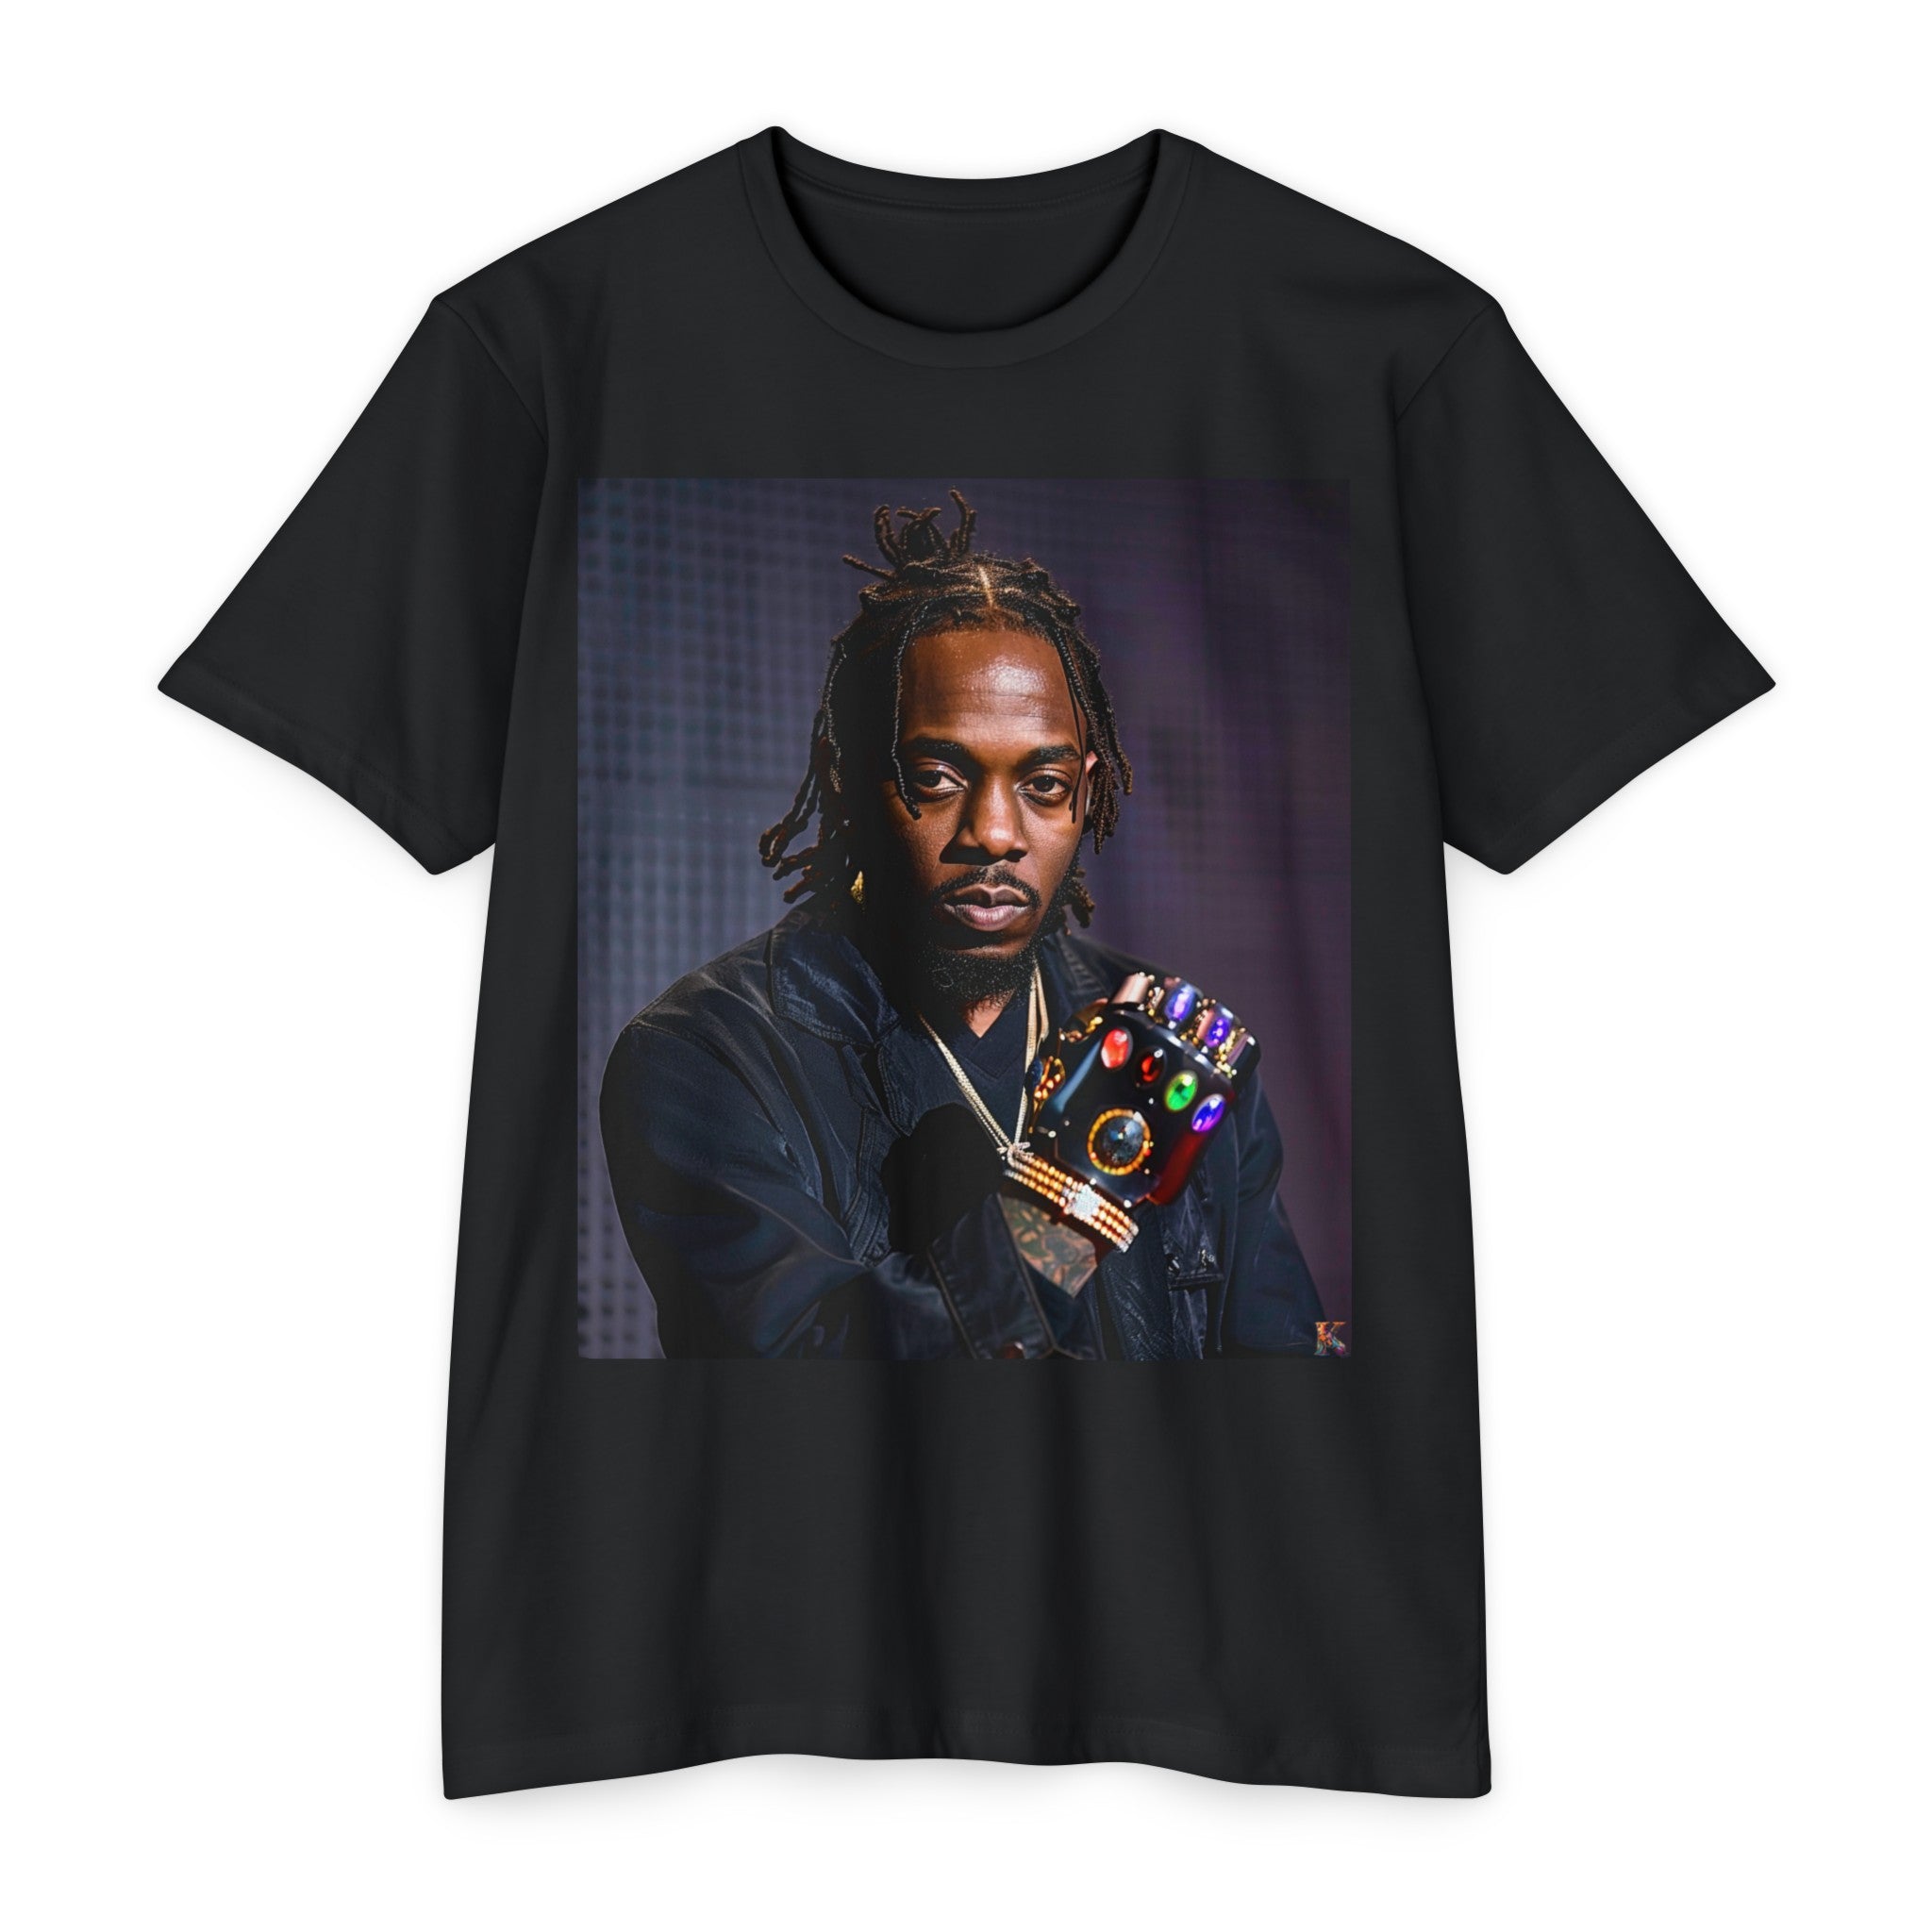 The image showcases a unisex CVC jersey t-shirt, colored in a rich, eye-catching hue that sets off the vivid, detailed graphic of K. Lamar wielding the Infinity Gauntlet. The design is bold yet stylish, perfect for making a statement while keeping comfortable, and it’s clearly a shirt that speaks to both music lovers and fans of superhero lore.